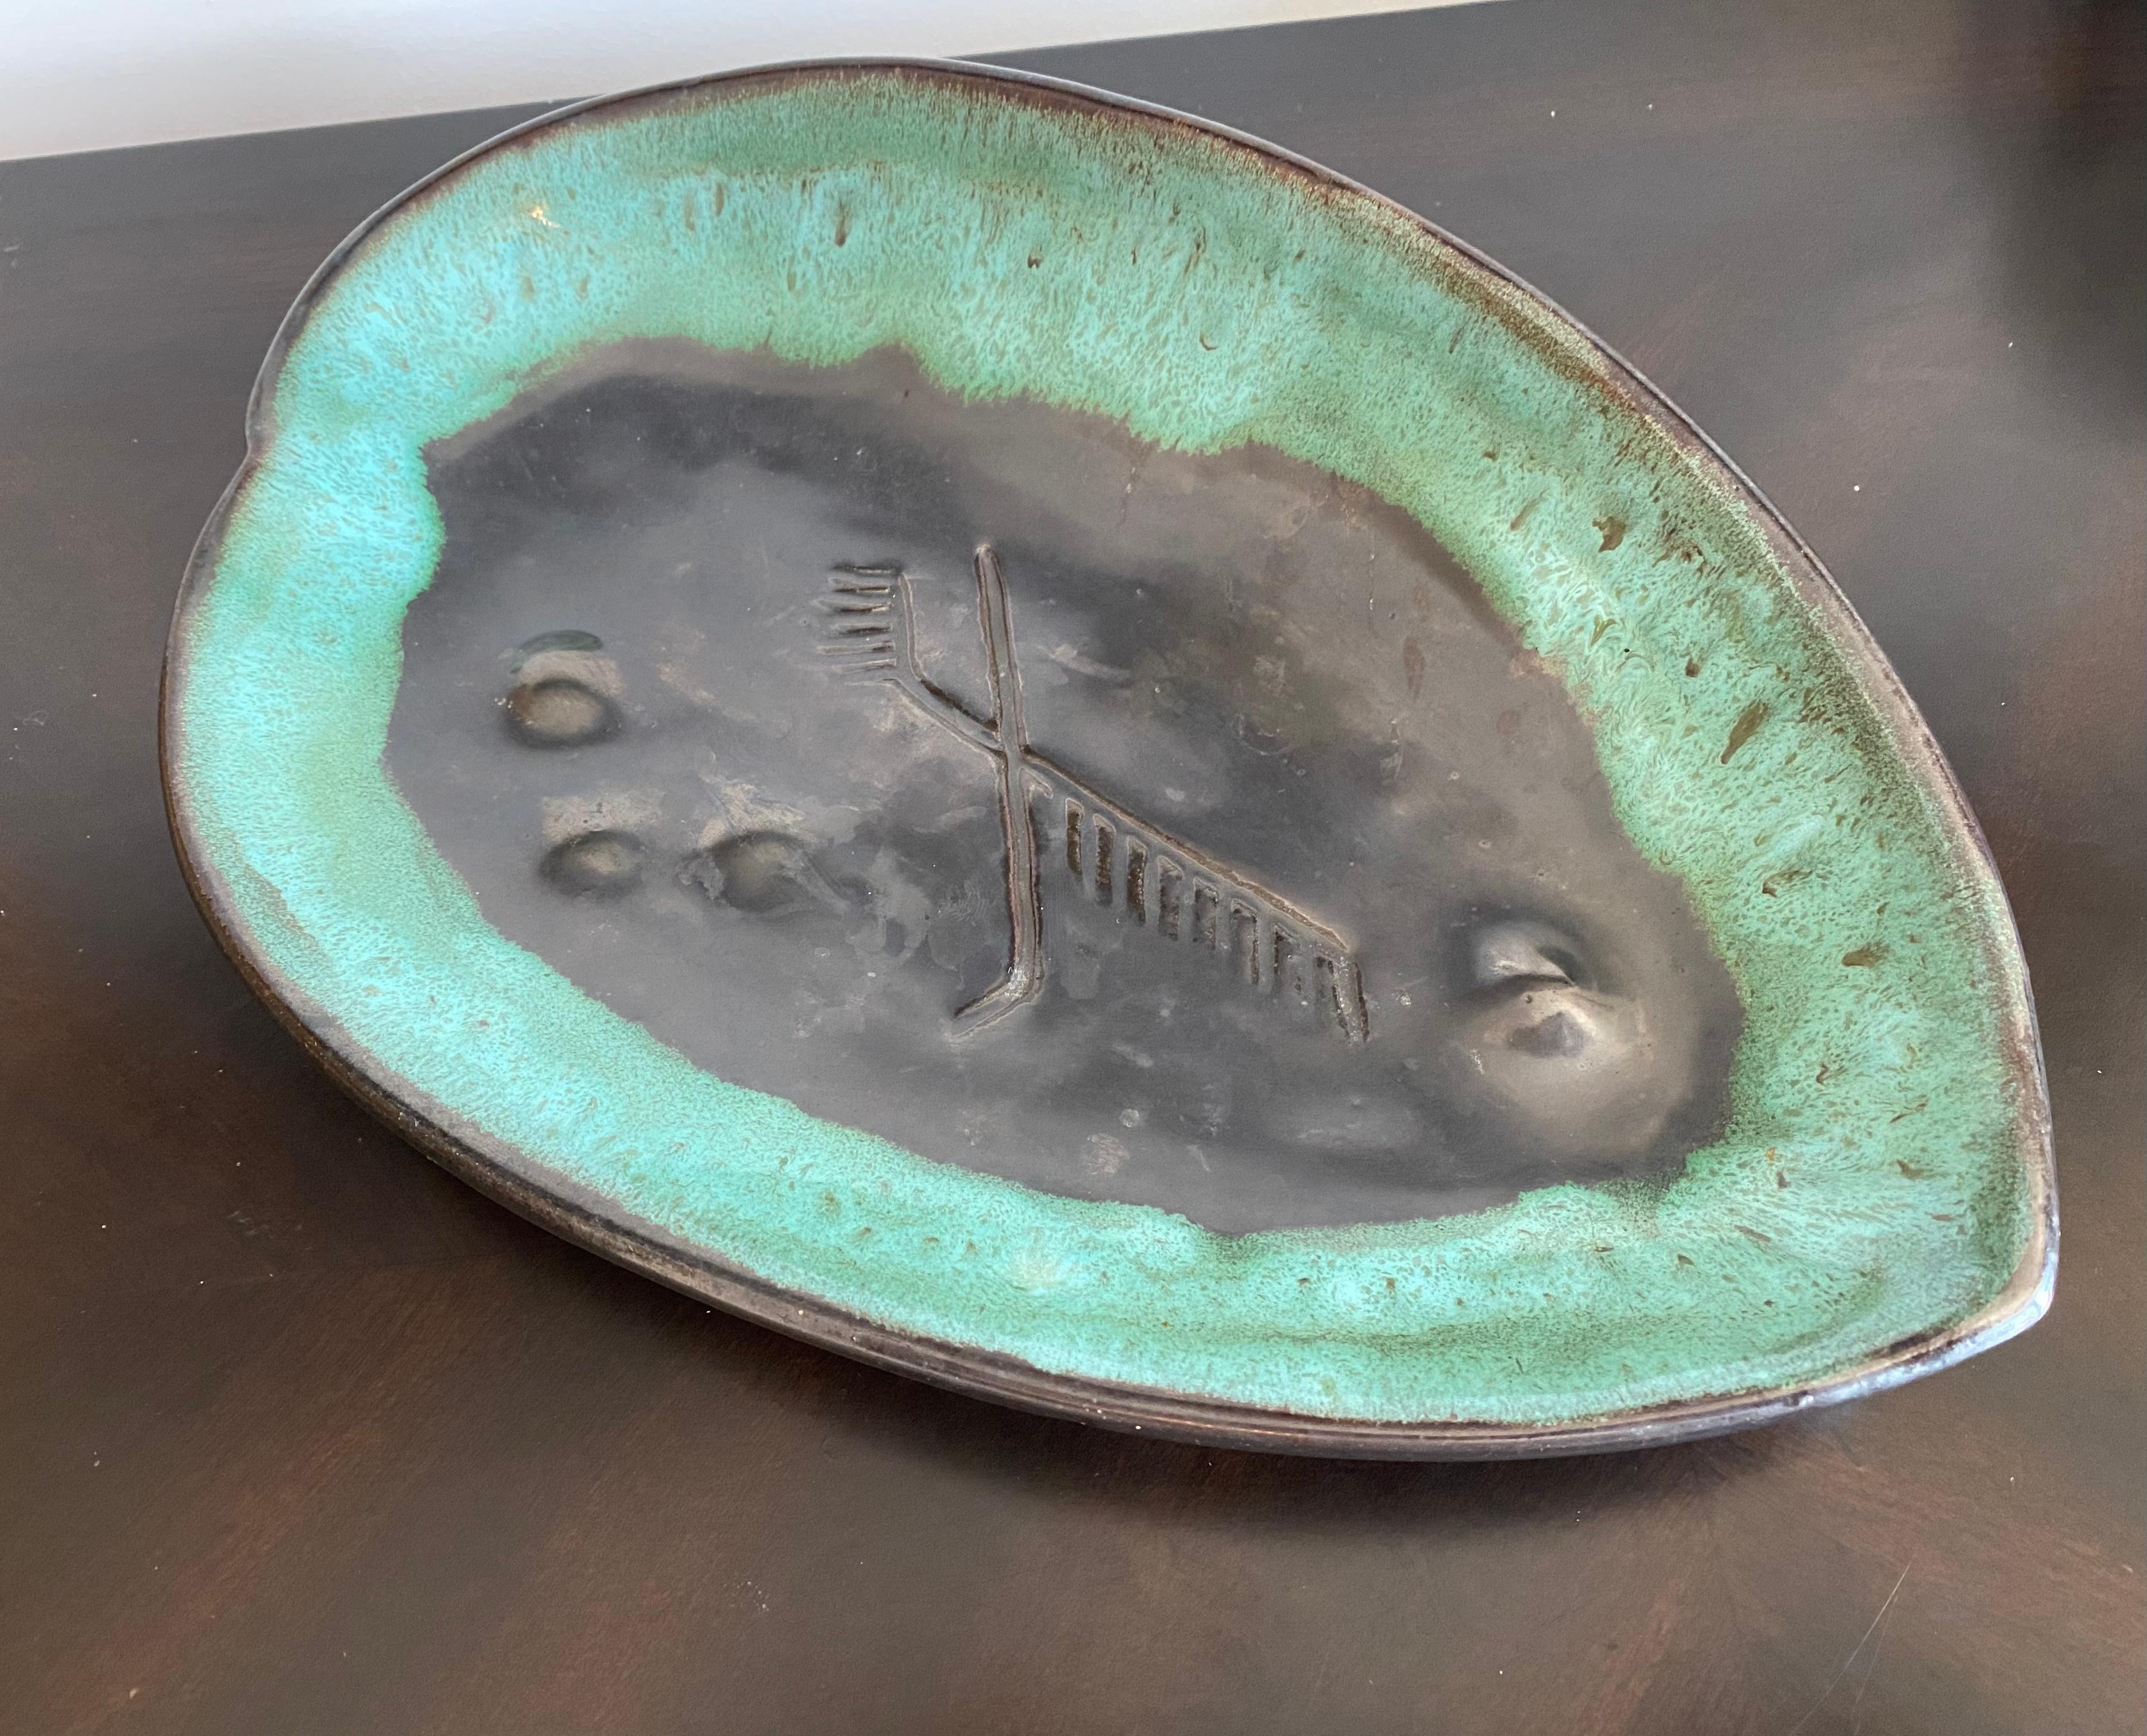 A beautiful 1940s asymmetrical leaf platter made by American studio potter, Mariana van Allesch. Signed.
Biography:

Marianna von Allesch was born Maria Anna Steudel in Germany.
Von Allesch emigrated to the United States in 1928 and by the late